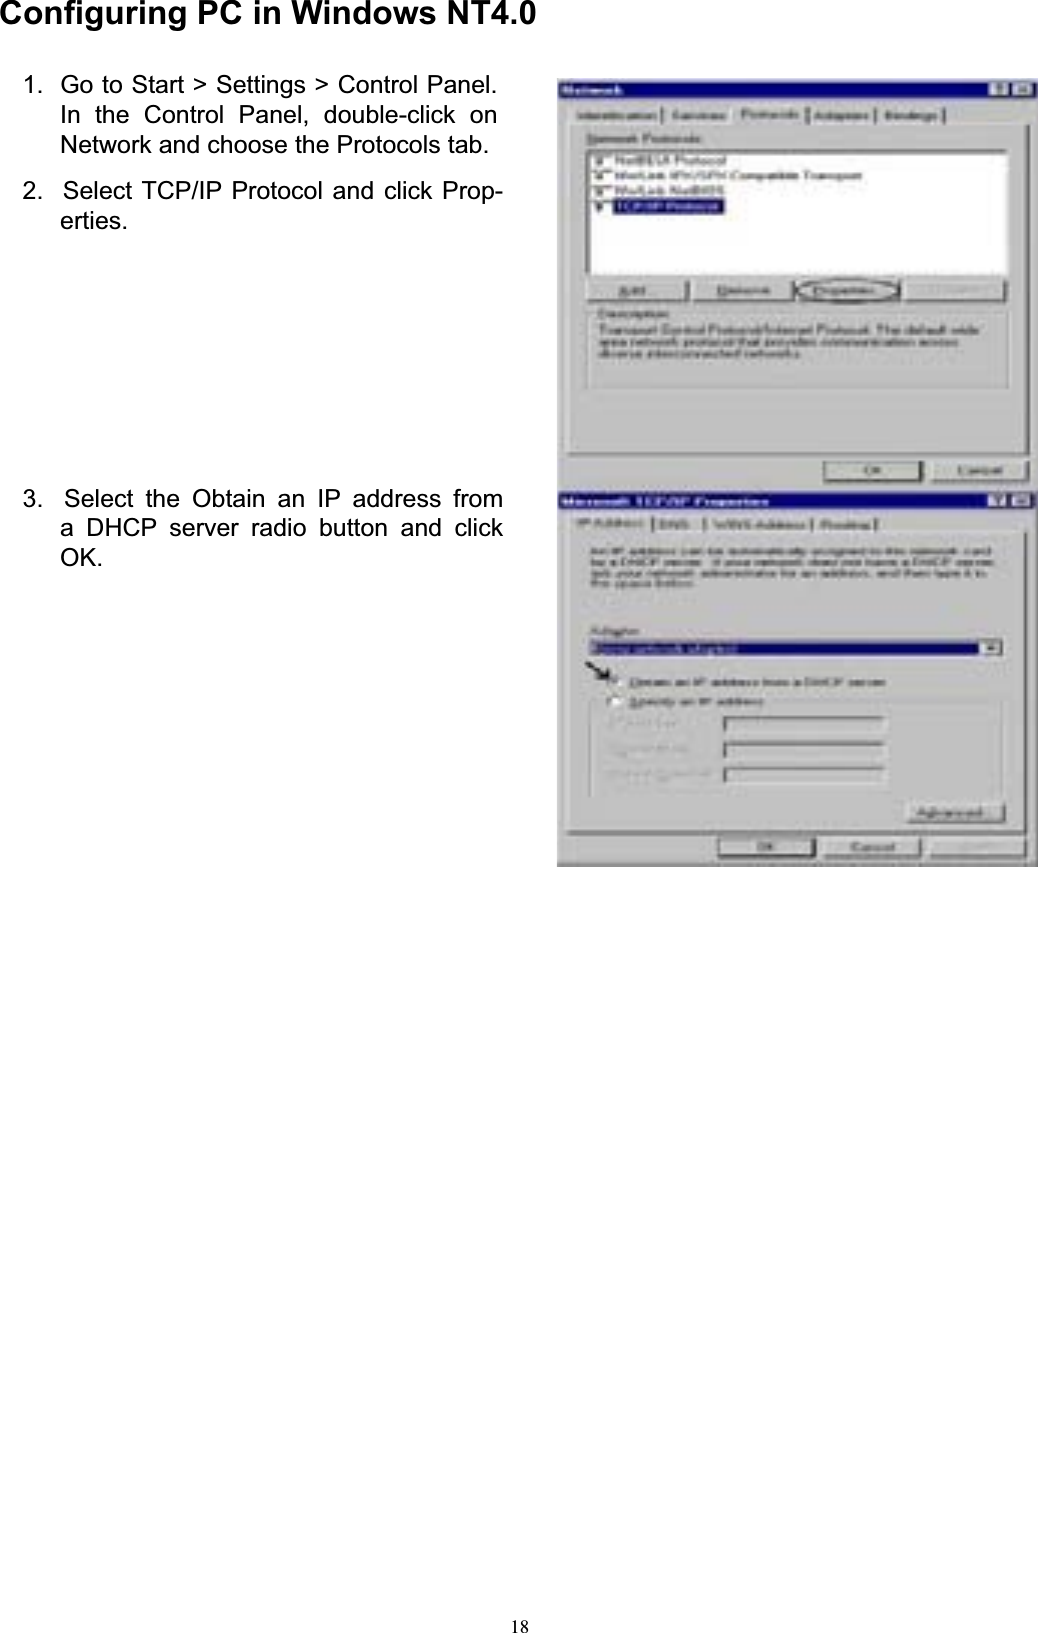 18Configuring PC in Windows NT4.01.  Go to Start &gt; Settings &gt; Control Panel. In  the  Control  Panel,  double-click  on Network and choose the Protocols tab. 2.  Select TCP/IP Protocol and click Prop- erties.3.  Select the Obtain an IP address from a DHCP server radio button and click OK.